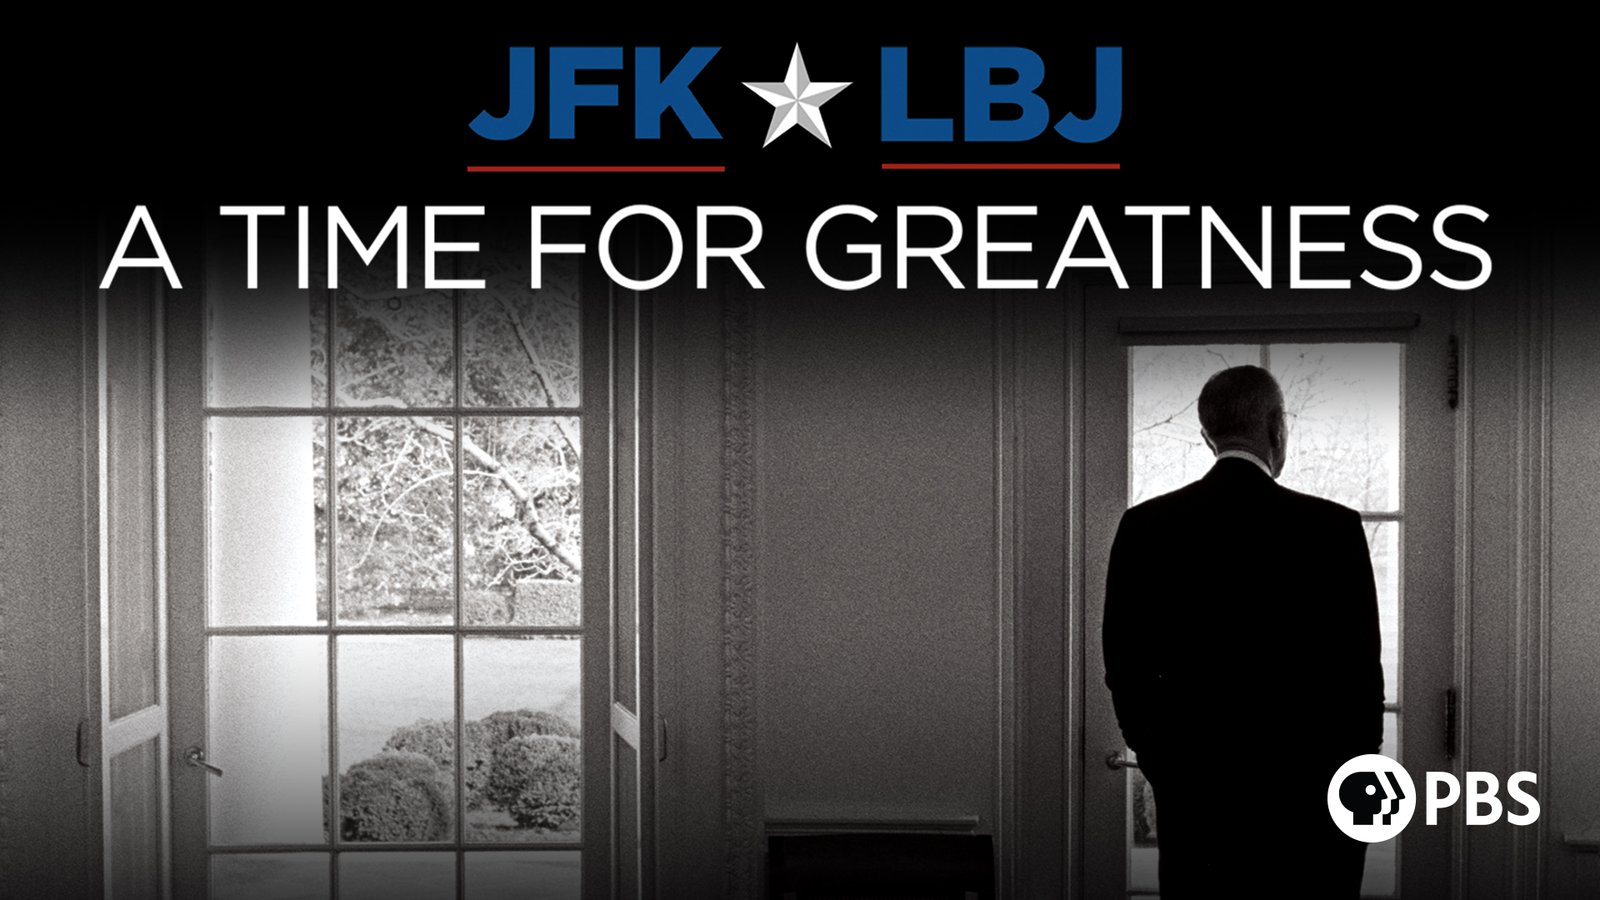 JFK & LBJ - A Time for Greatness